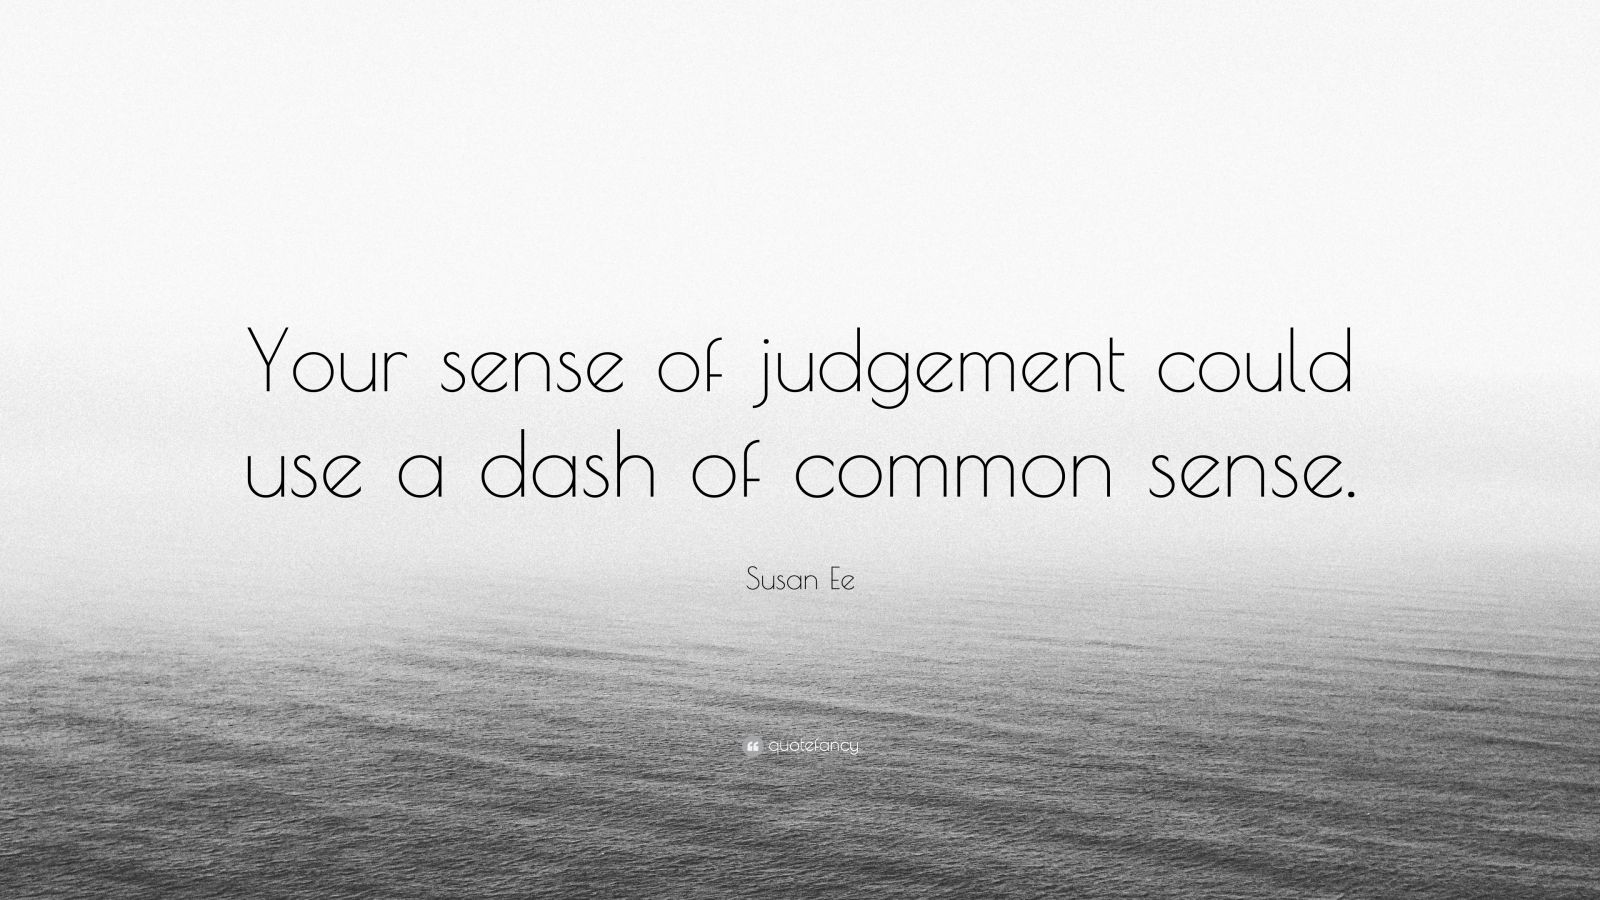 Susan Ee Quote: “Your sense of judgement could use a dash of common